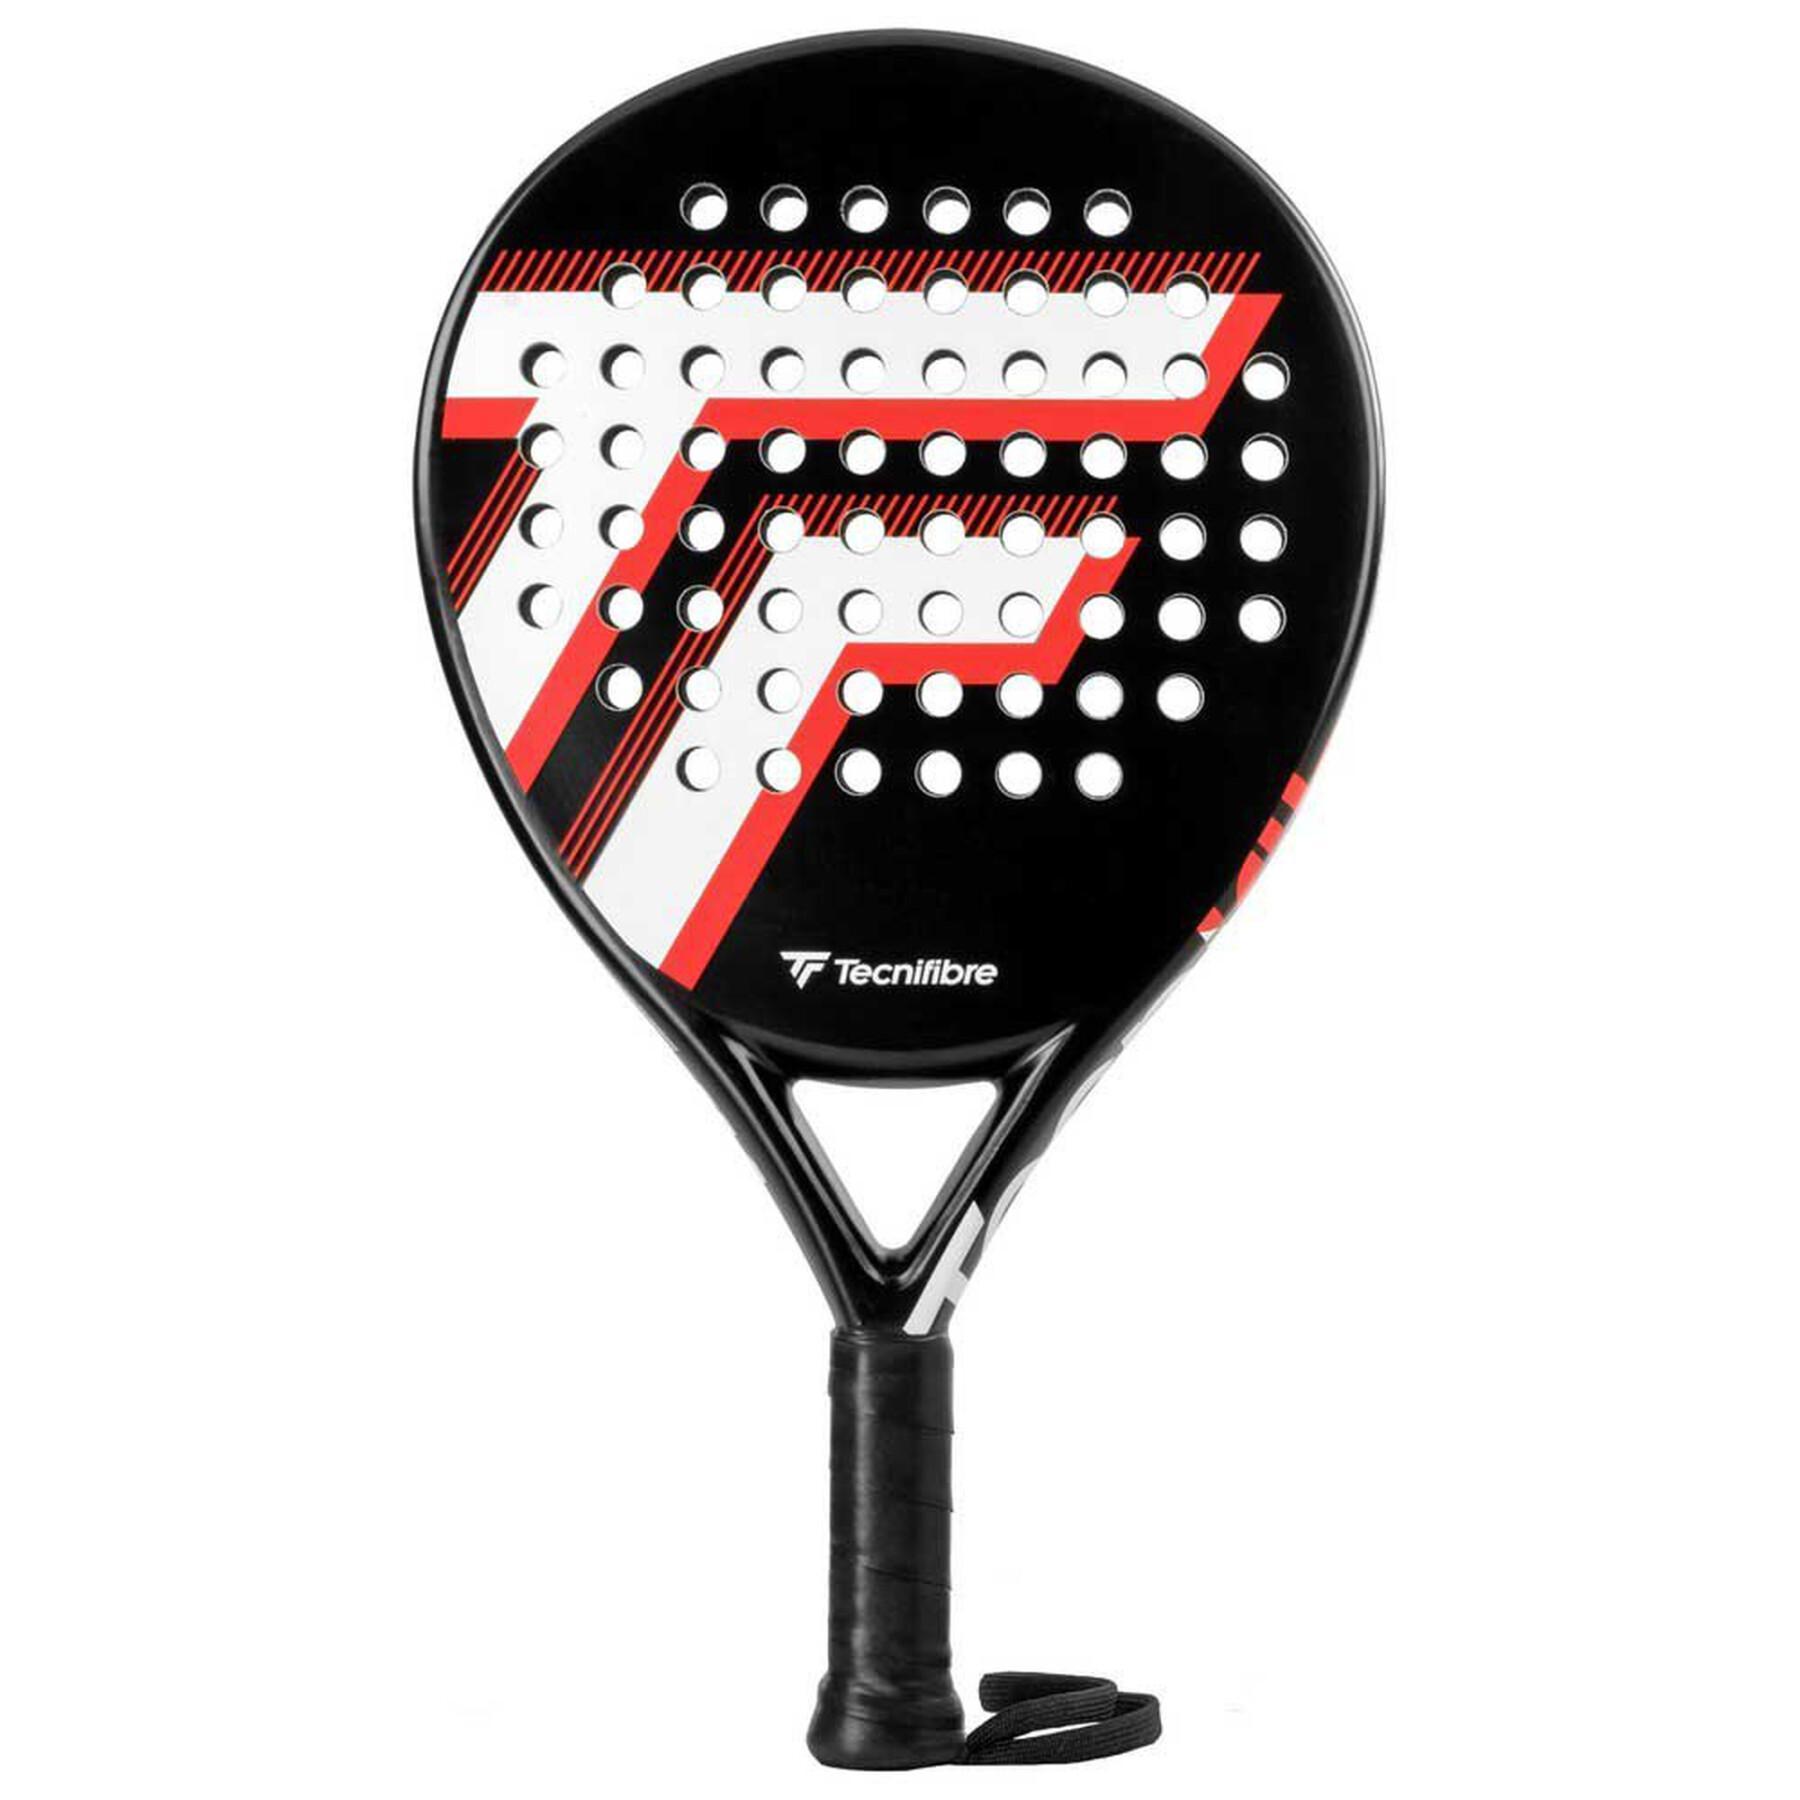 Paddelracket Tecnifibre New Wall Master One